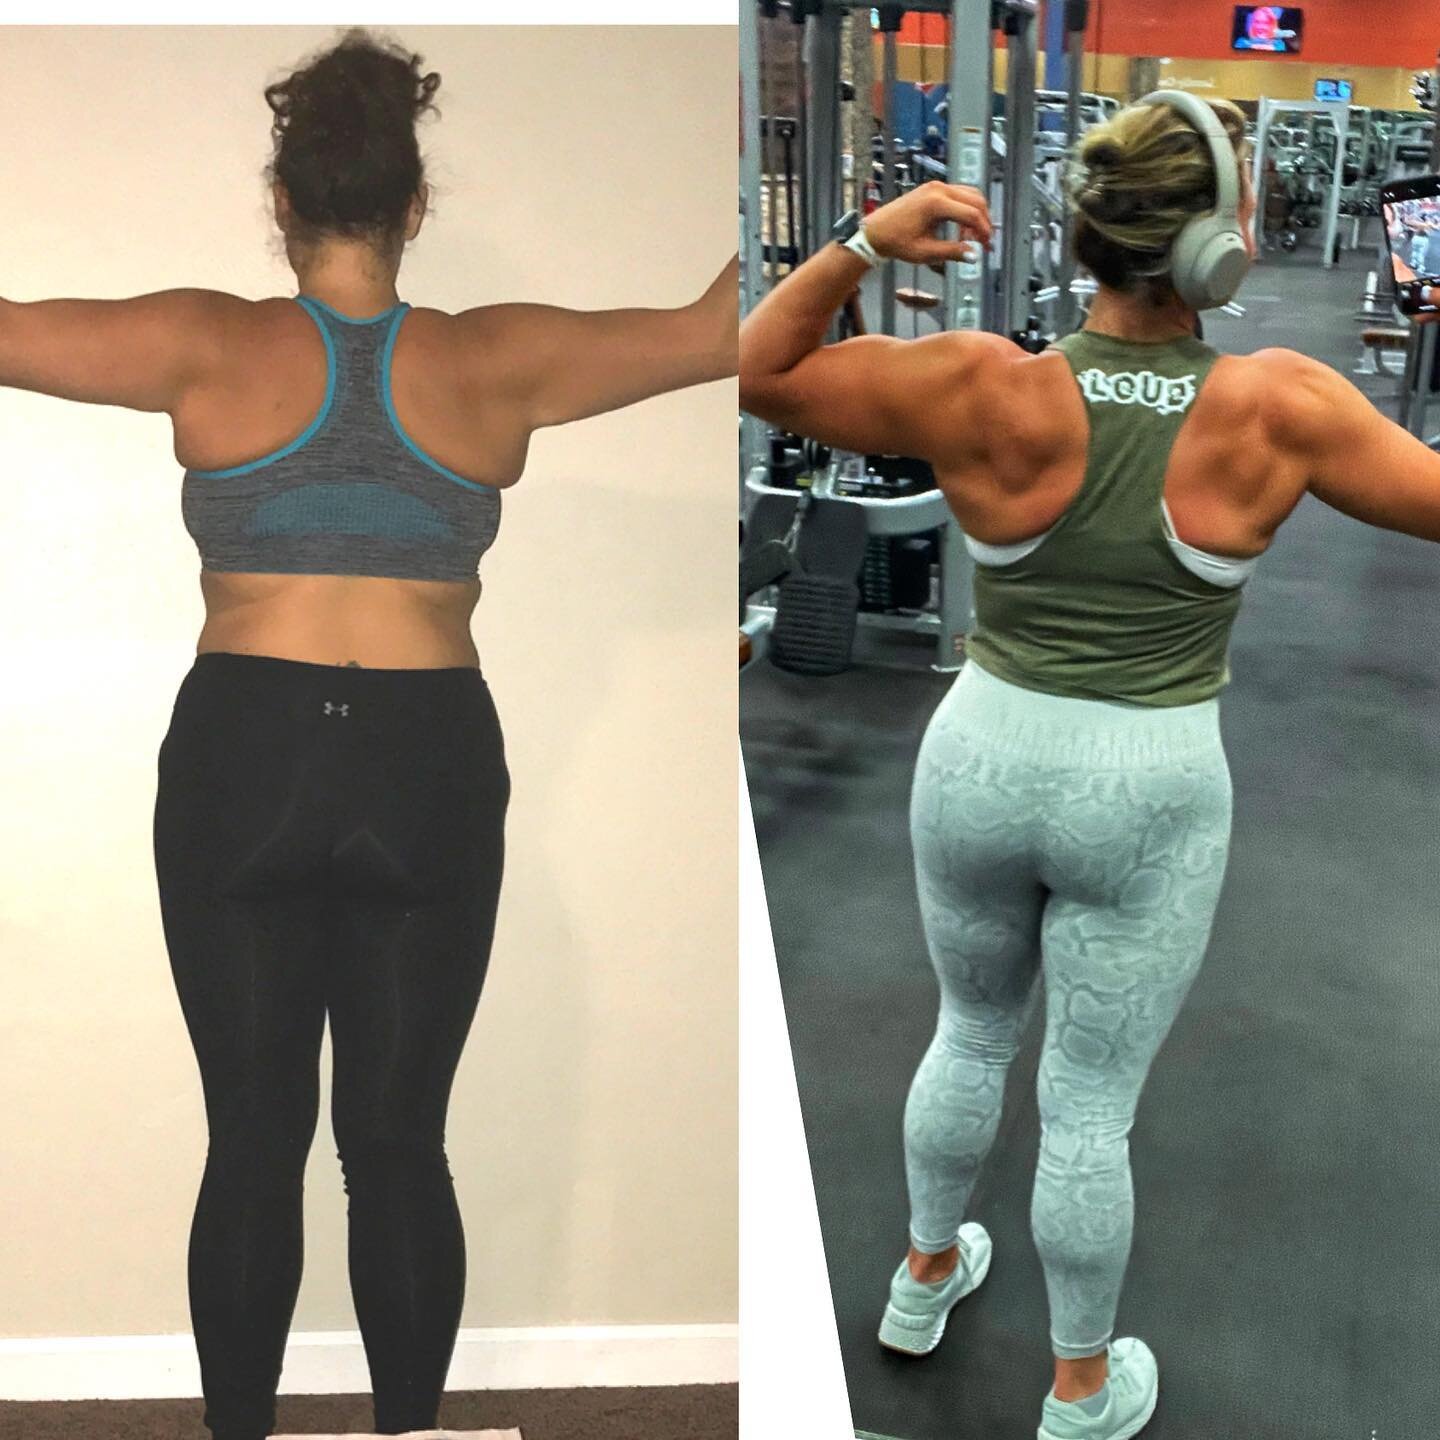 𝟬𝟭/𝟮𝟬𝟭𝟳 --&gt; 𝟬𝟯/𝟮𝟬𝟮𝟭 #mondaymotivation 

What if I told you I weigh just about the same in both pictures?

What if I told you I started this journey and NEVER looked back?

Where would I be without being EXCITED for the future holding m